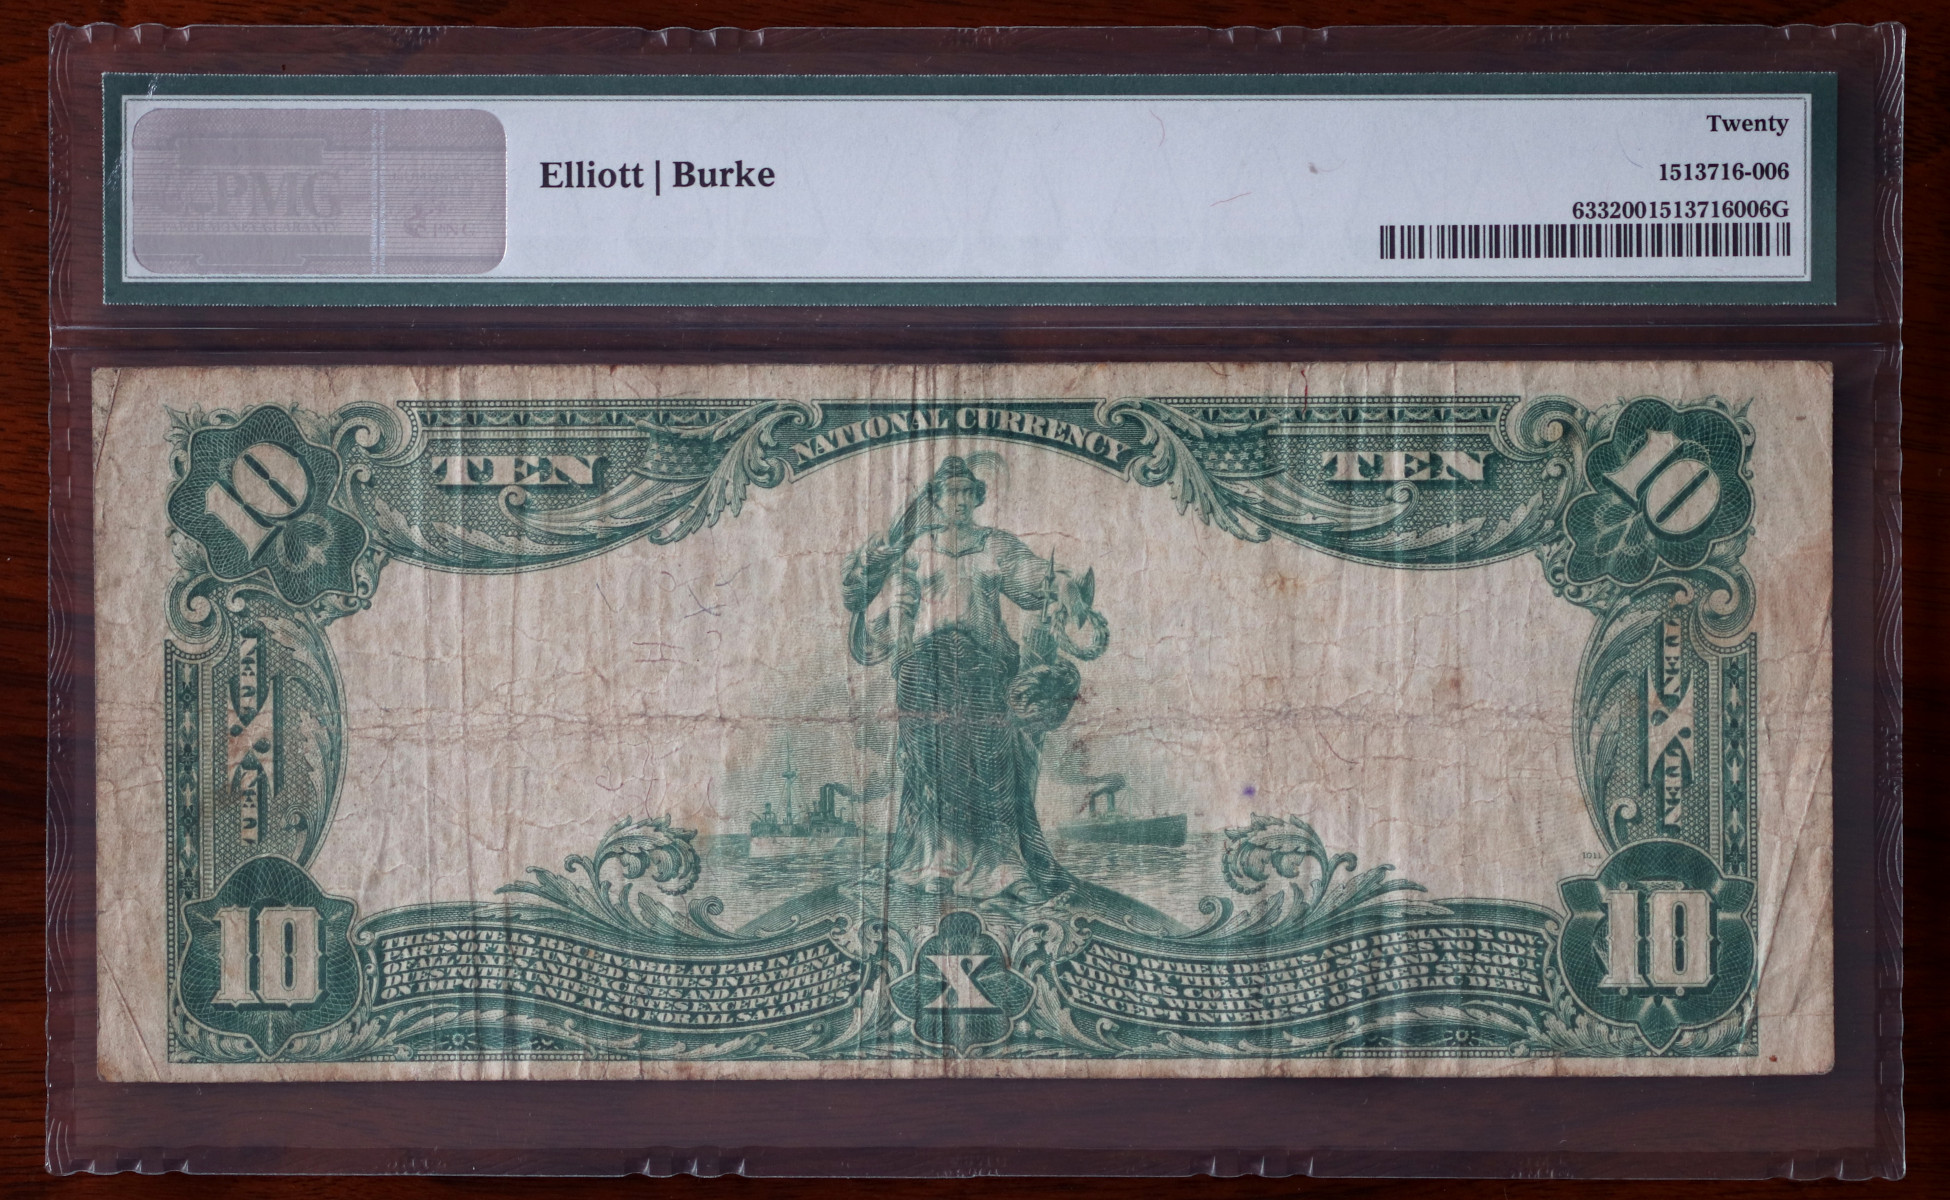 A $10 National Bank Note, Long Beach, certified PMG Very Fine 20, from The South Bay Collection of Rare National Bank Notes, offered by Palos Verdes Coin Exchange